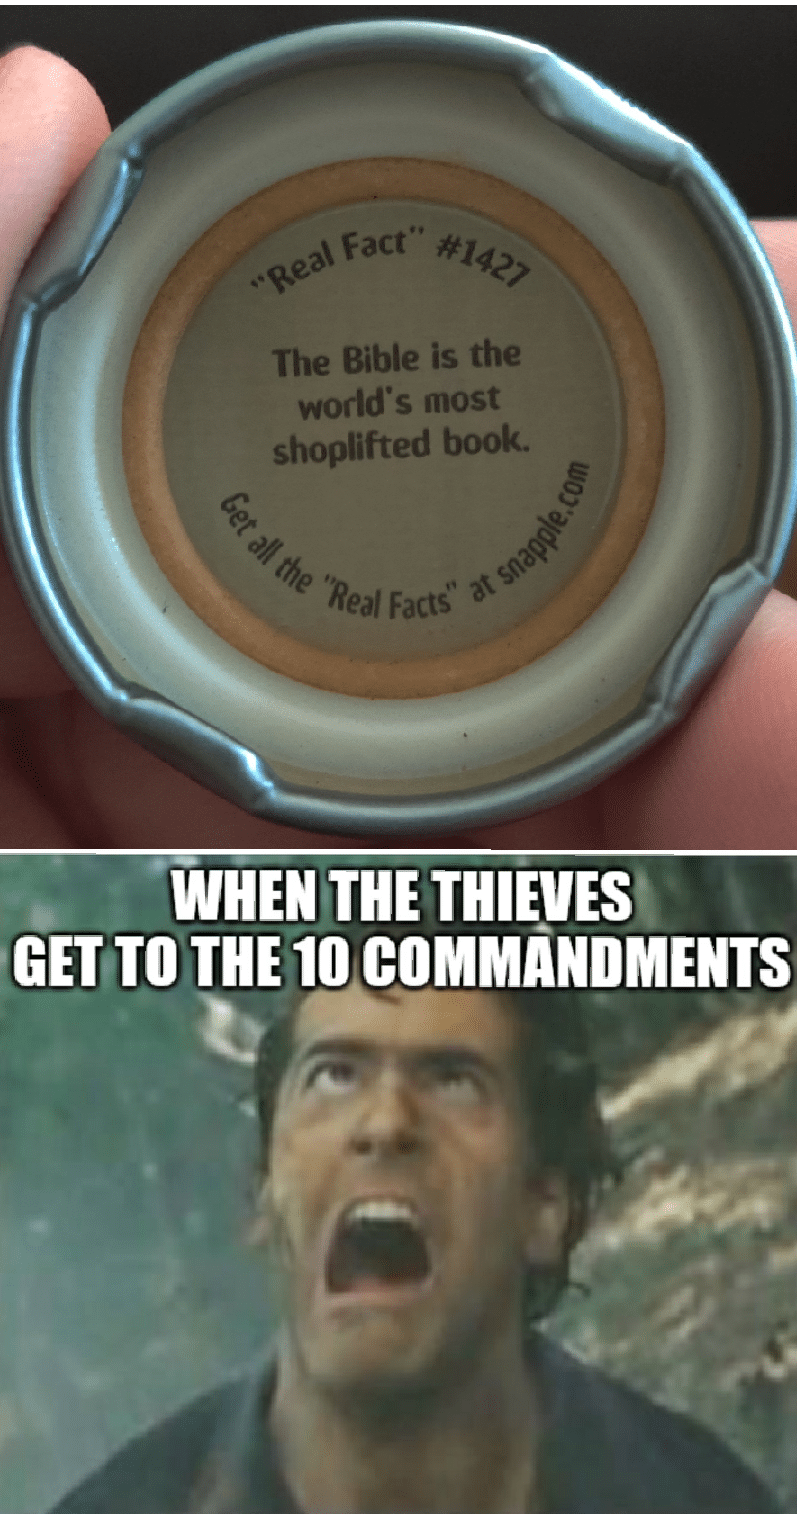 Christian, Earth Christian Memes Christian, Earth text: The Bible is the world's most shoplifted book. WHEN THE THIEVES GETTO THE 10 COMMANDMENTS 